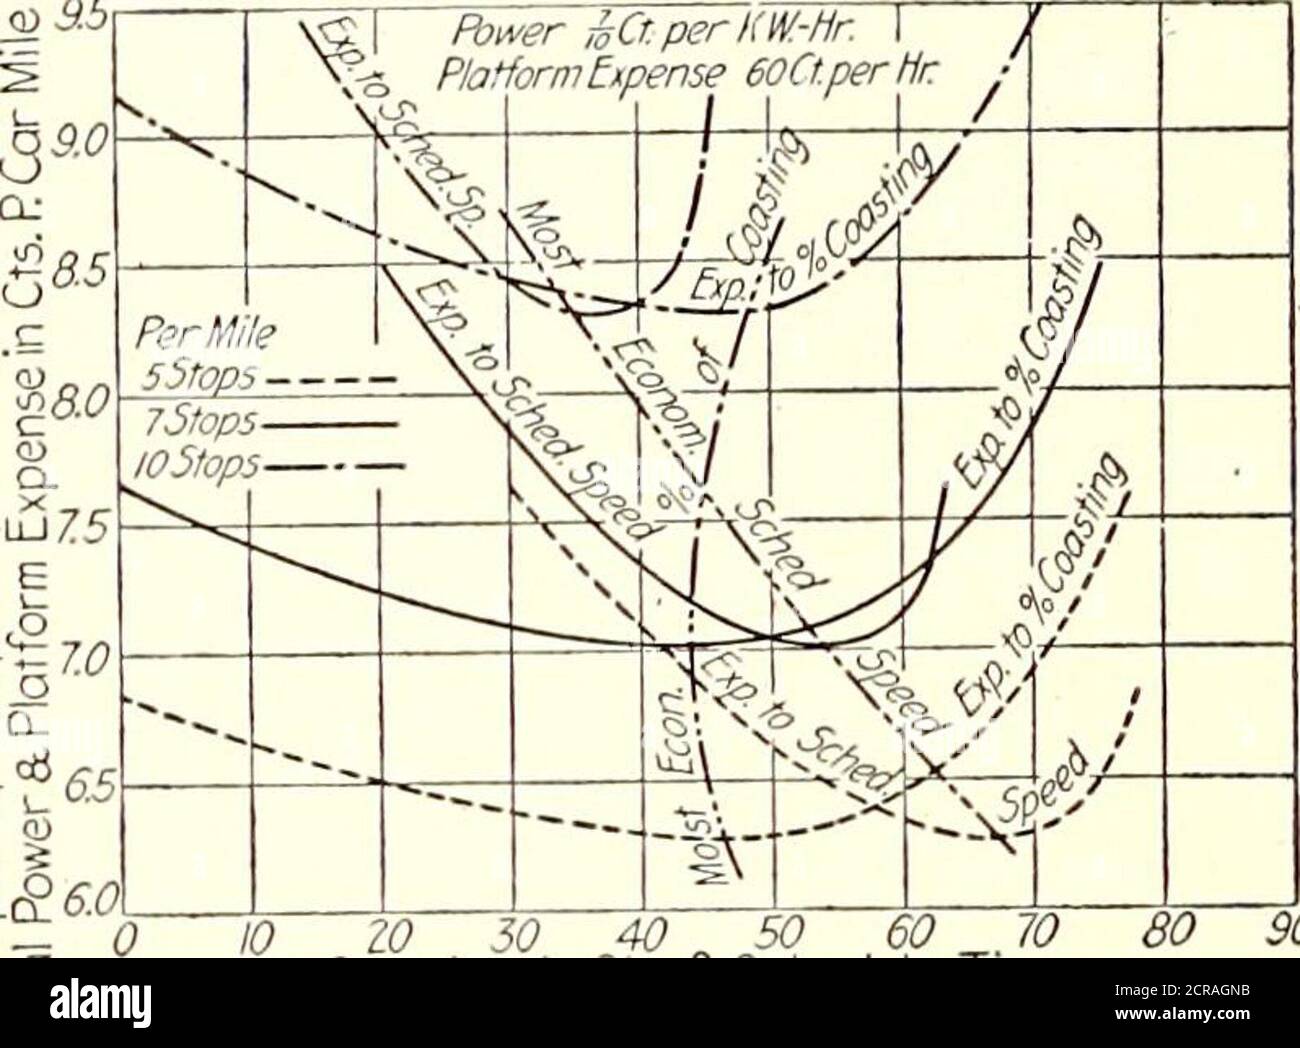 . Electric railway journal . 10 ZO SO 40 50 60 70. 80 90 100Coasting in % of Schedule Time 7 8 9 Id tl 12 . 13. « 15 16 f7Schedule Speed in Miles per Hour Fig. 13—Curves Showing the Relation of Power to Schedule Speed and Per Cent Coasting forThree, Five and Nine Stops Per Mile 7.0r a 9.5 %60 CDQ  E fcZOa. 60 70 Coasting in of Schedule Time8 9 . 10 II 12 13Schedule Speed in Miles per Hour 14 15 Fig. 14—Curves Showing the Relation of Powerand Platform Expense to Per Cent Coasting andSchedule Speed, for Five, Seven and Ten StopsPer Mile 835-  3J/1QIO9 .-£CP -ofdS a o 6 Pi wer 4 Ct.per KW.-Hr. Pl Stock Photo